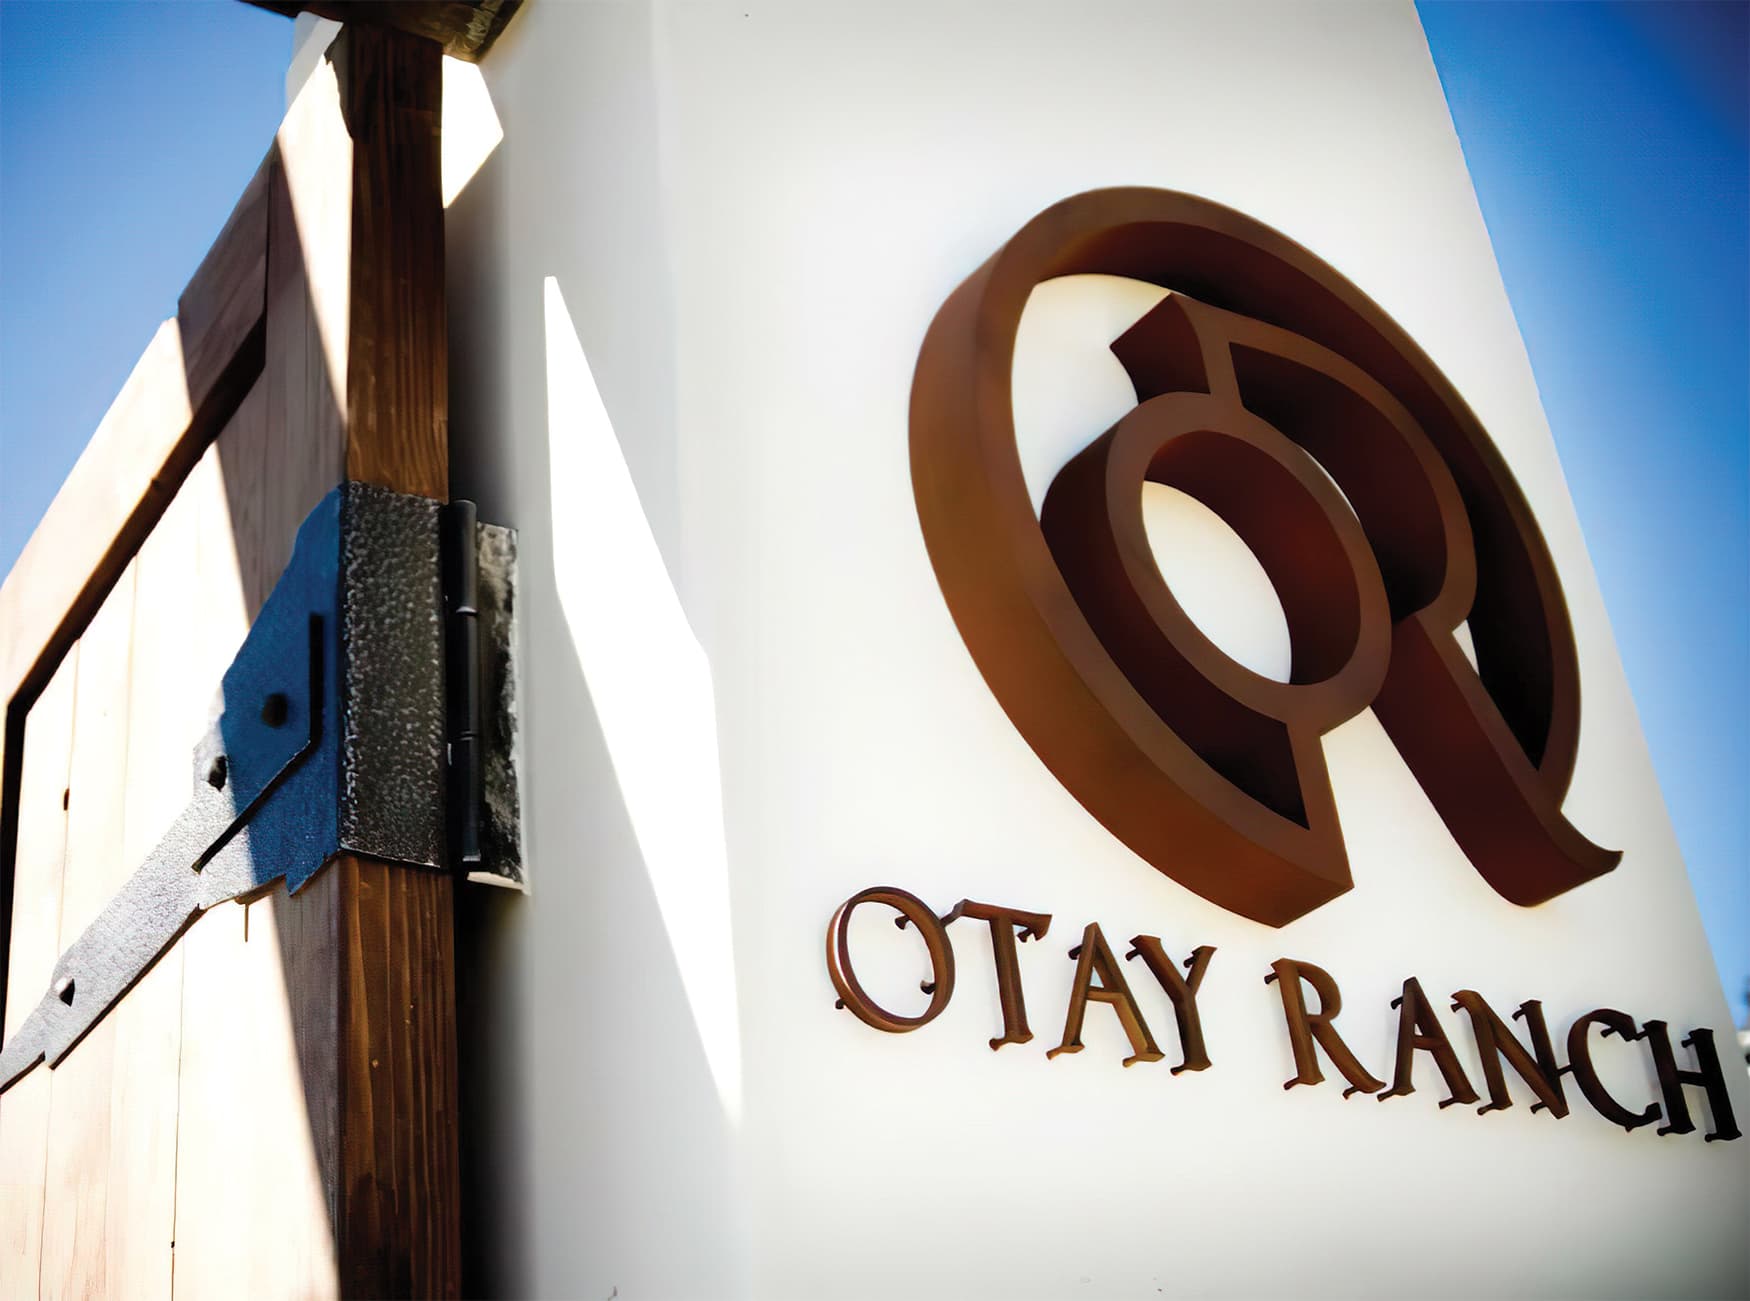 Otay Ranch, an outdoor retail development. Project Identity Signage.